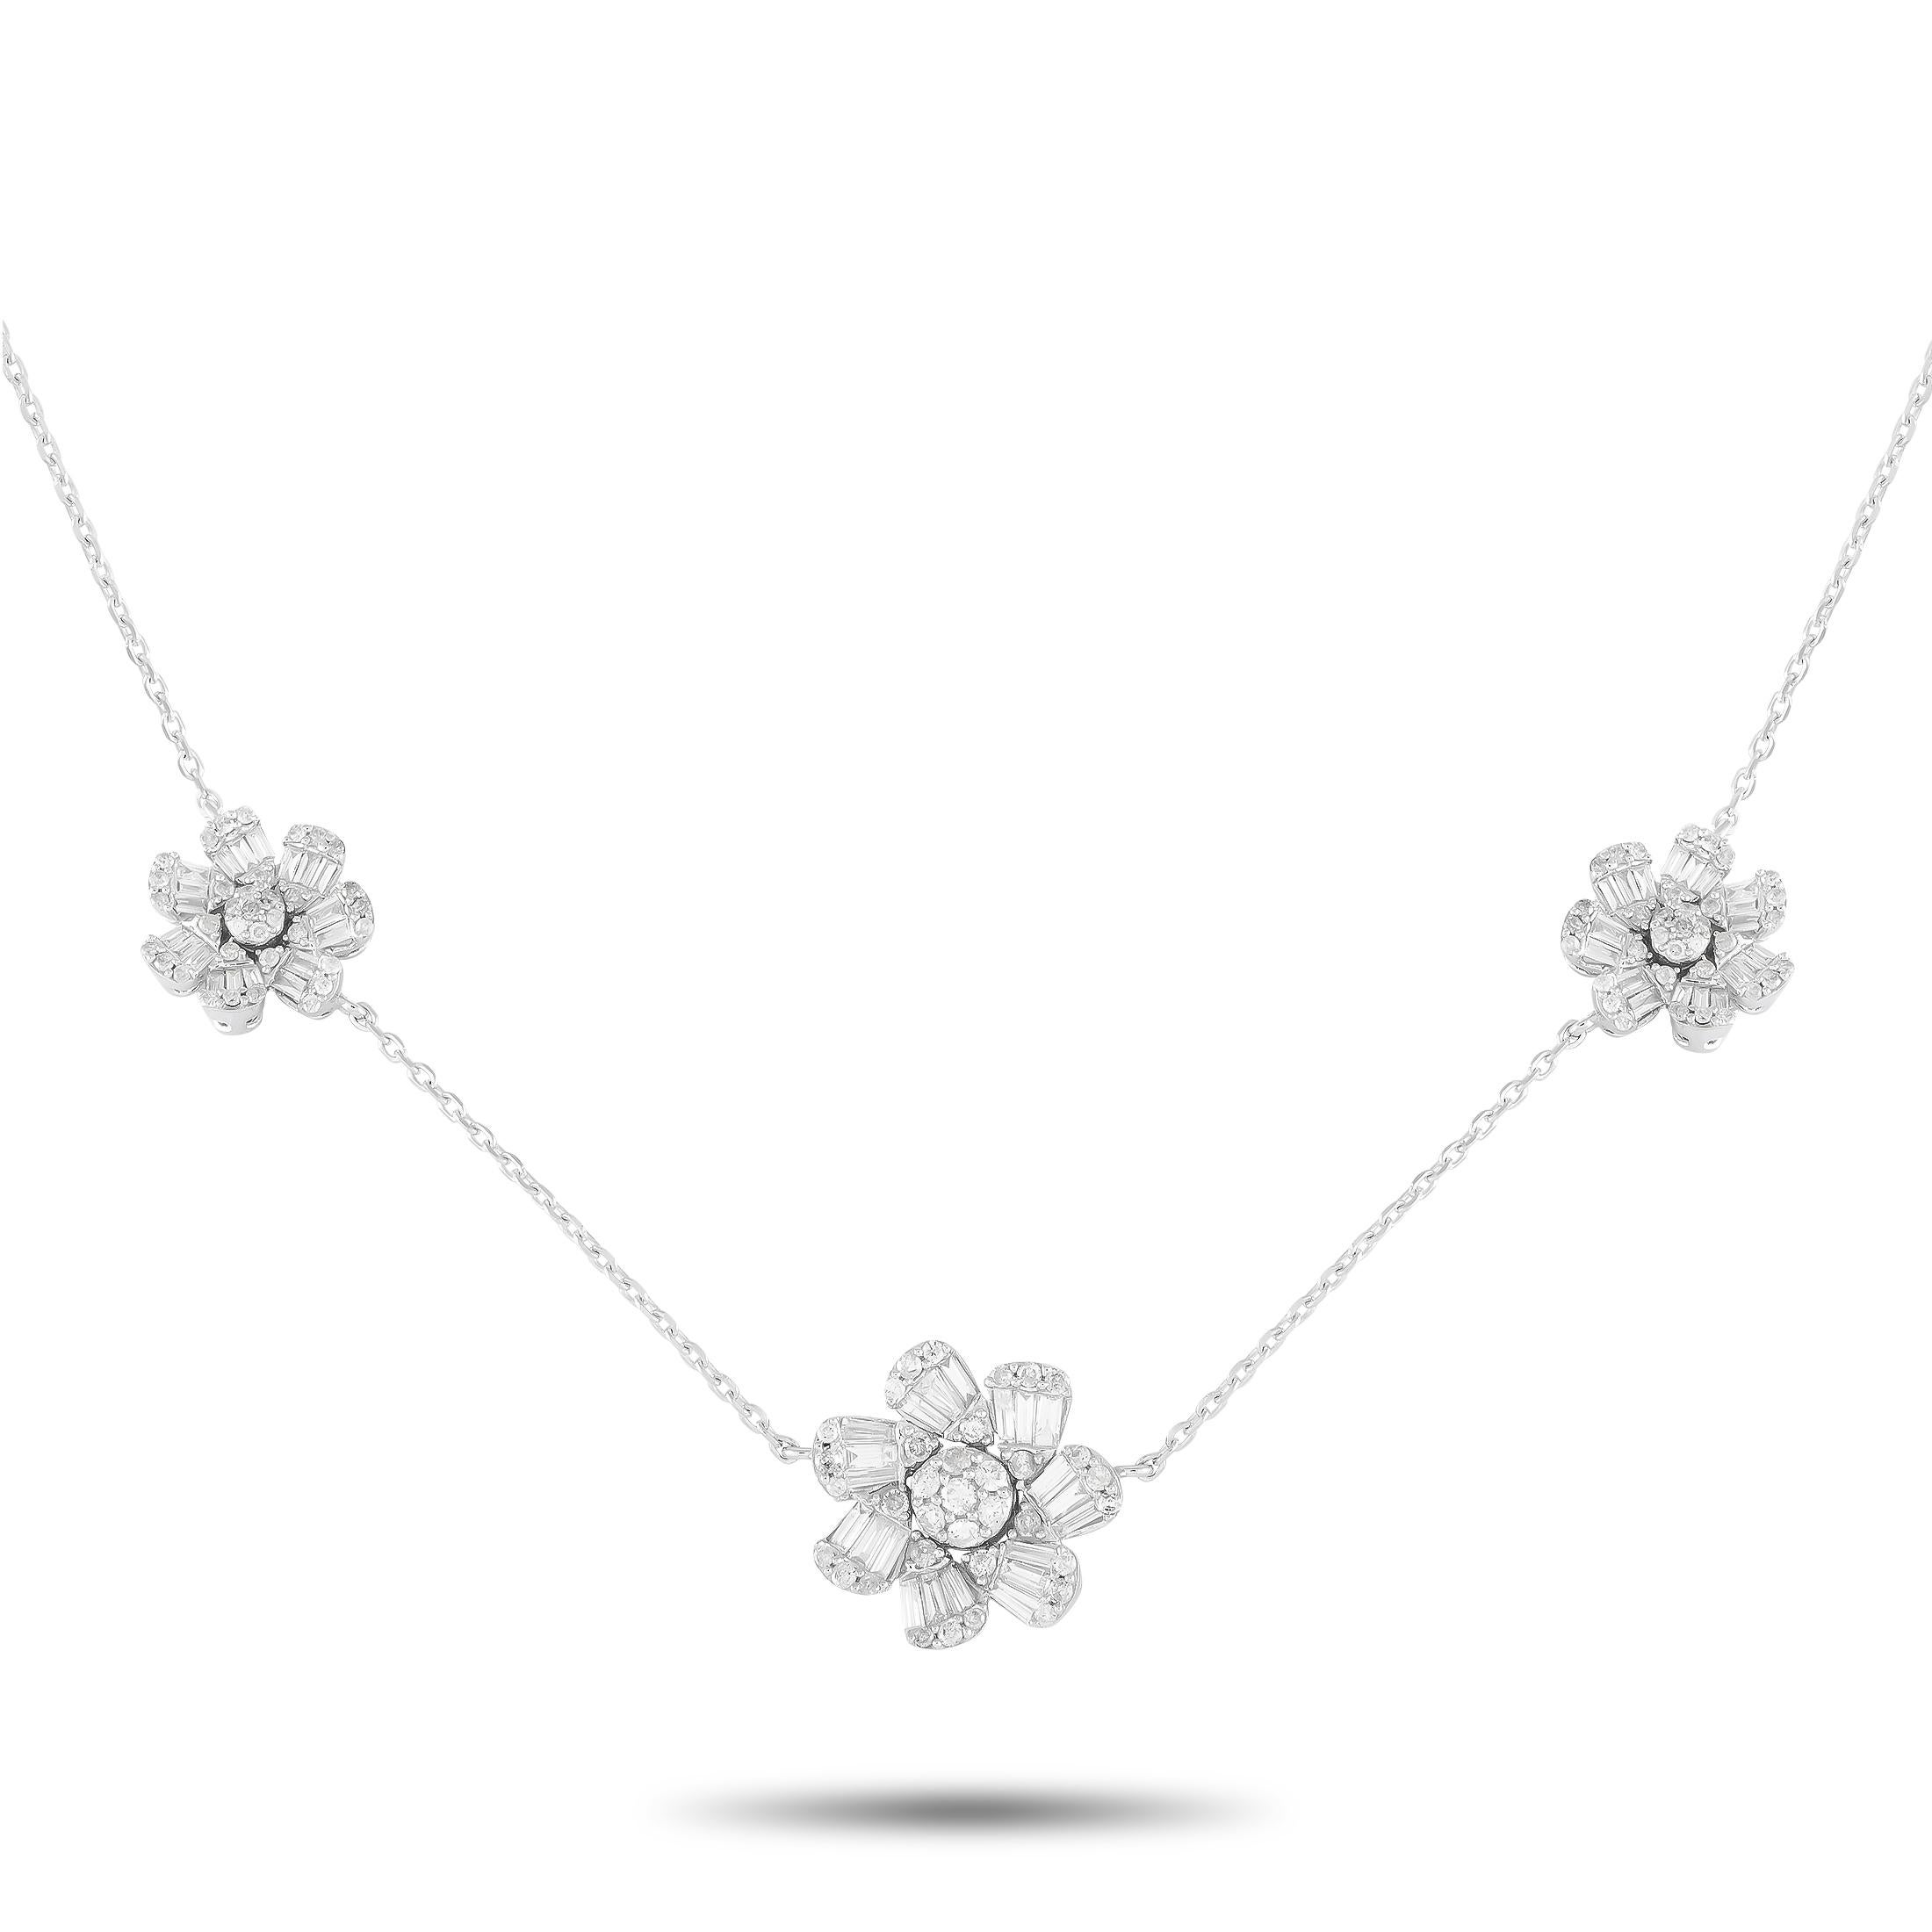 14K White Gold 1.20ct Diamond Three Flower Necklace NK01360 In New Condition For Sale In Southampton, PA